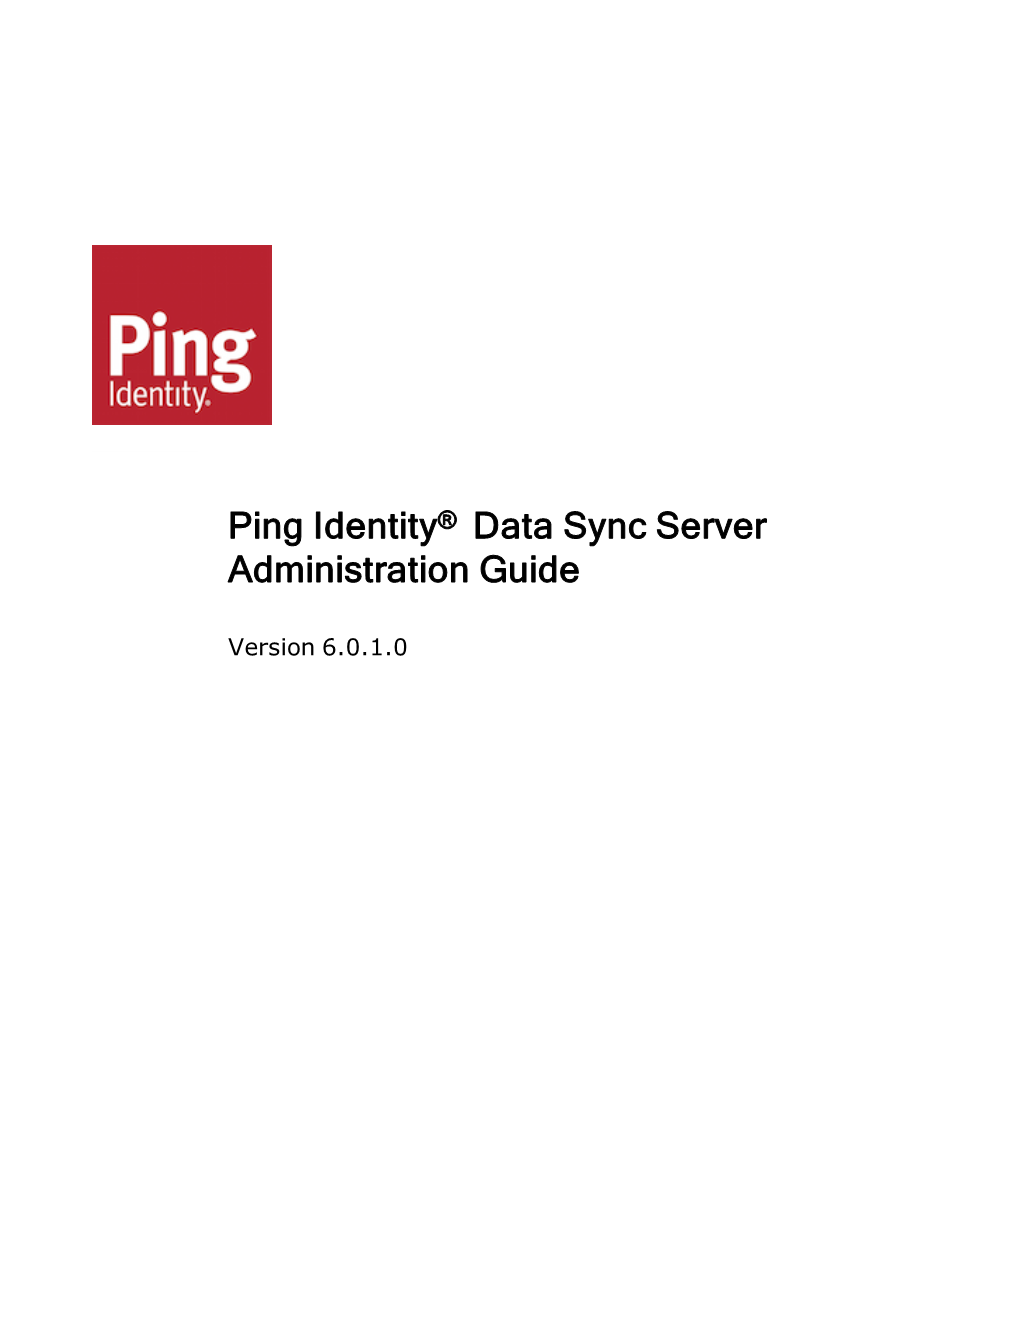 Ping Identity® Data Sync Server Administration Guide